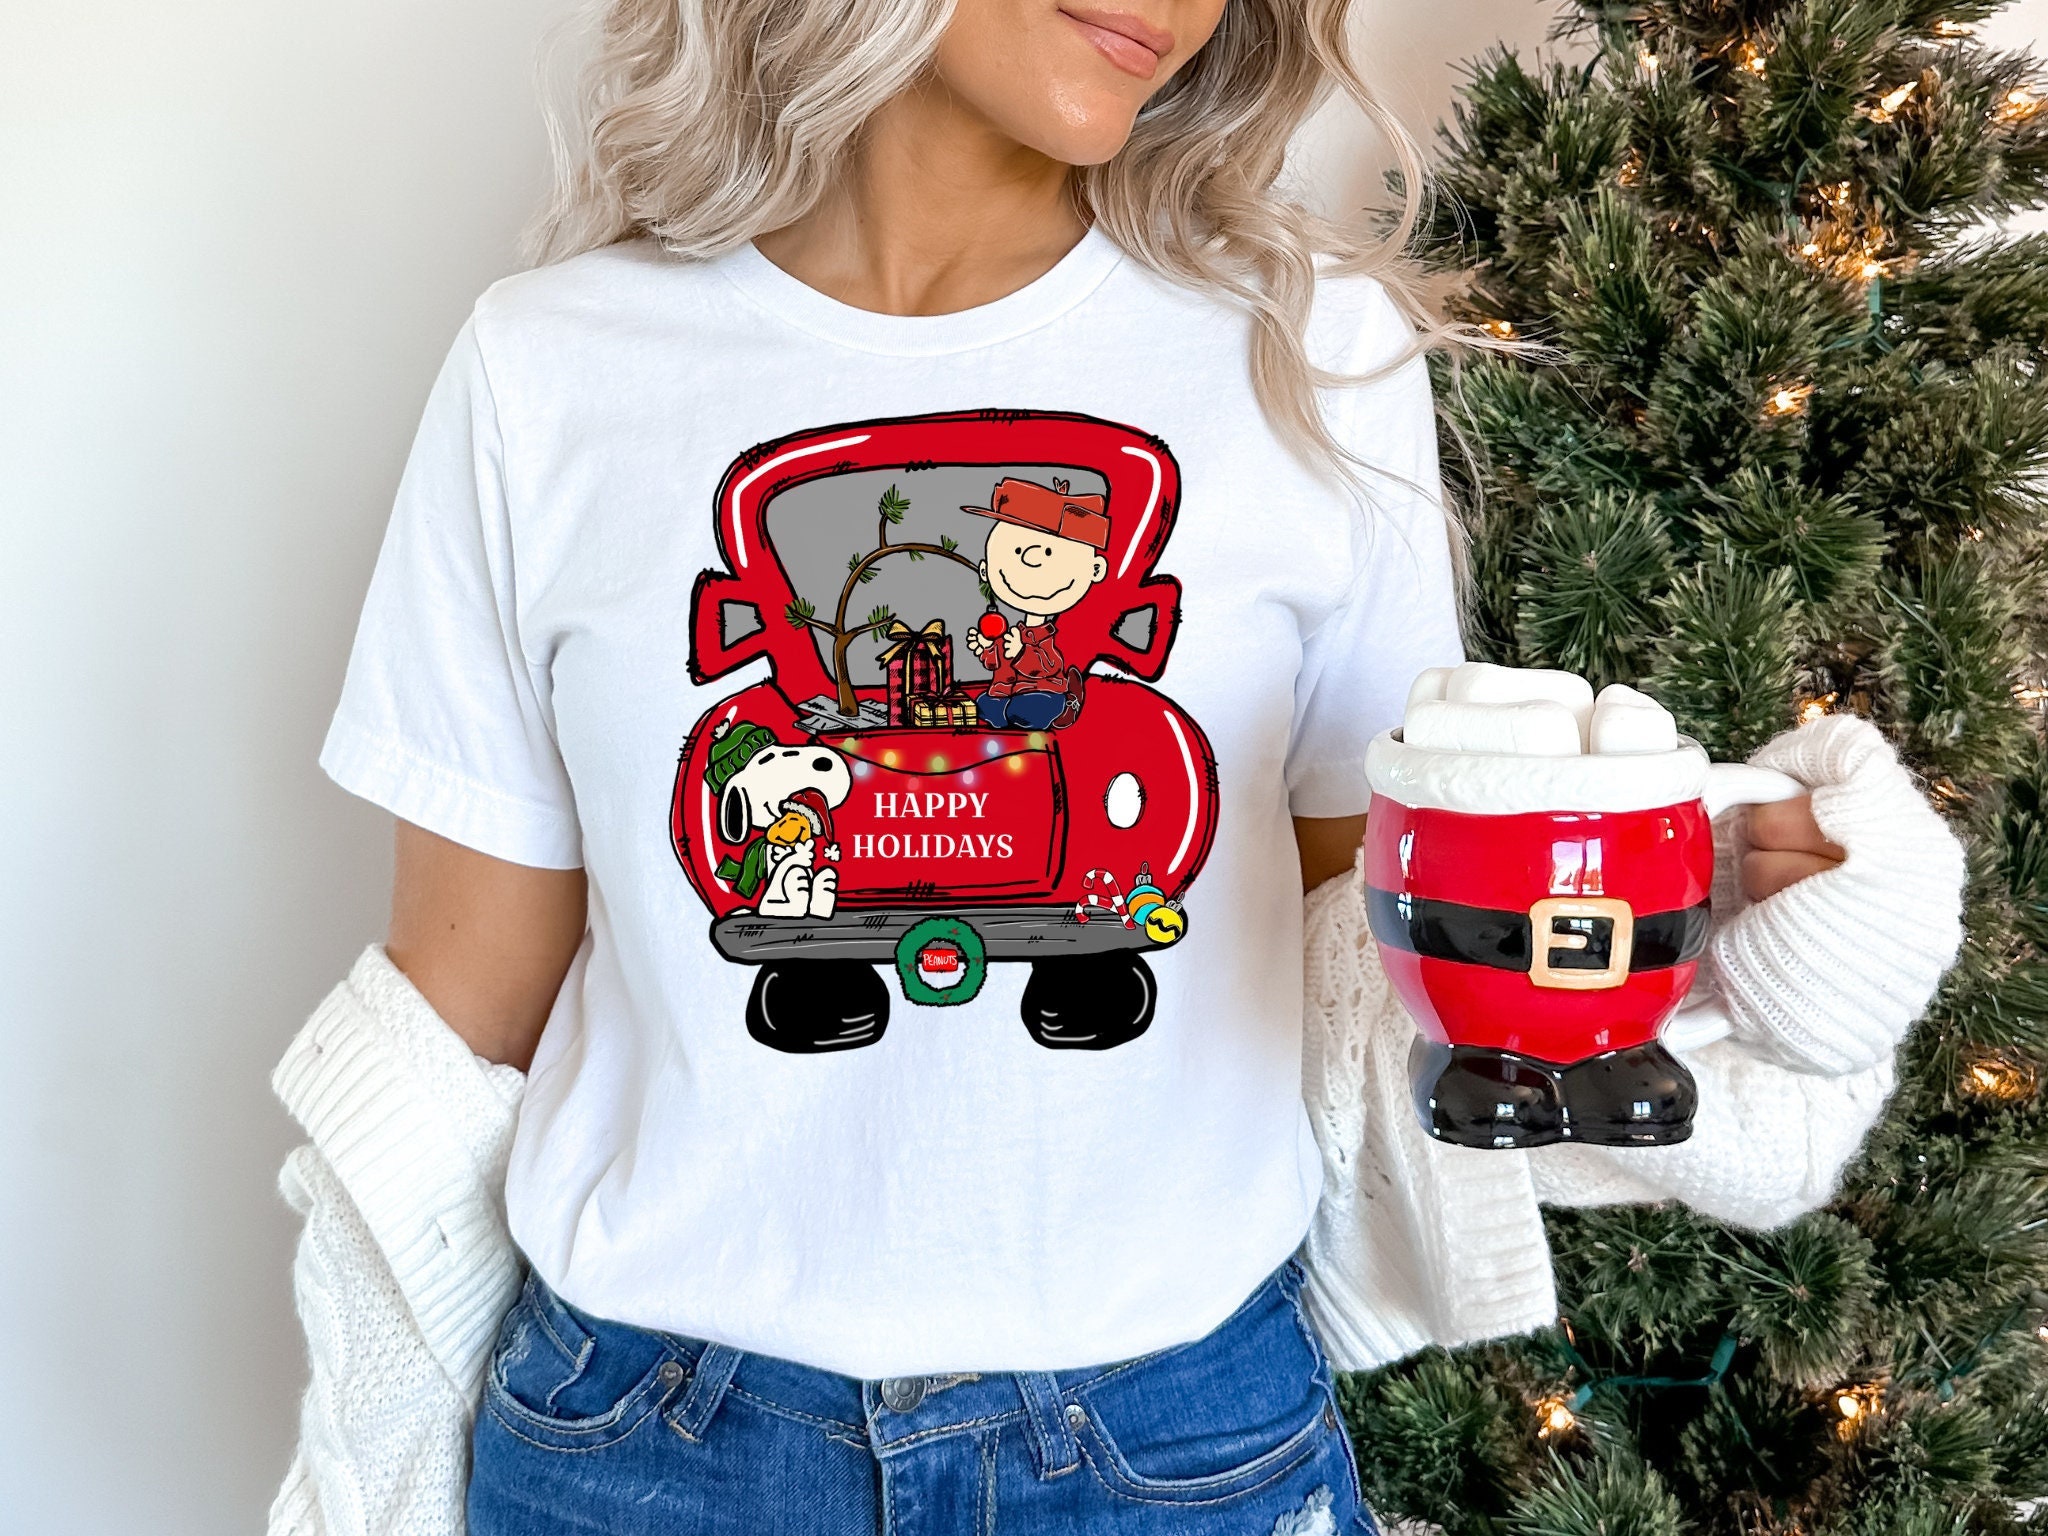 Discover Happy Holidays, Christmas T-Shirt